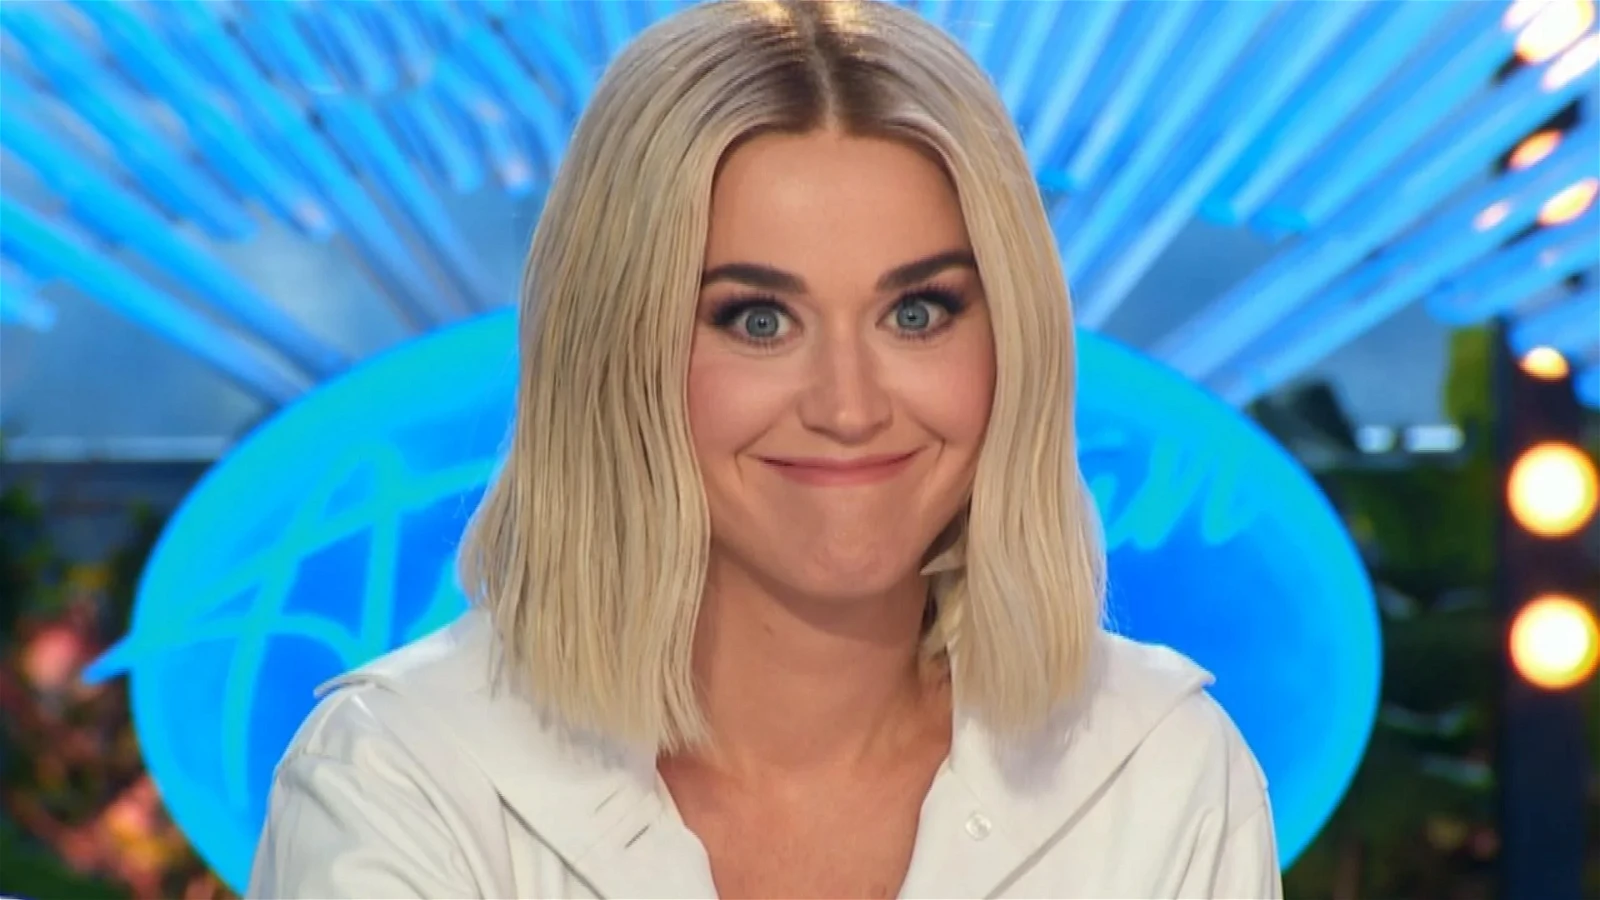 Not Jennifer Lopez or Mariah Carey, Katy Perry is the highest paid American Idol judge after Simon Cowell